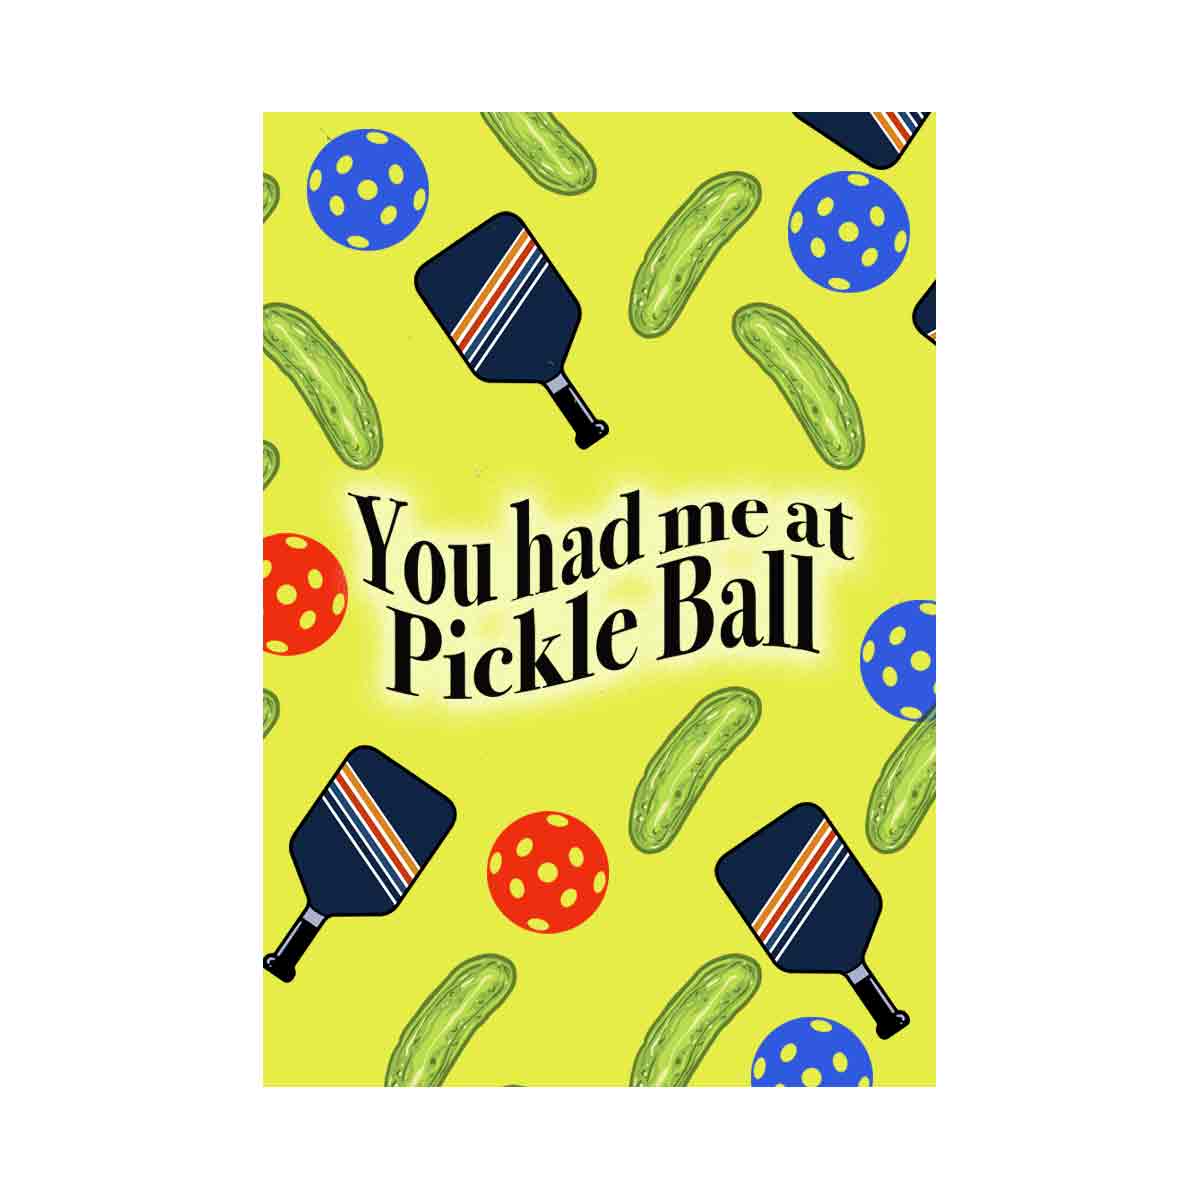 You had me at pickle ball - yellow